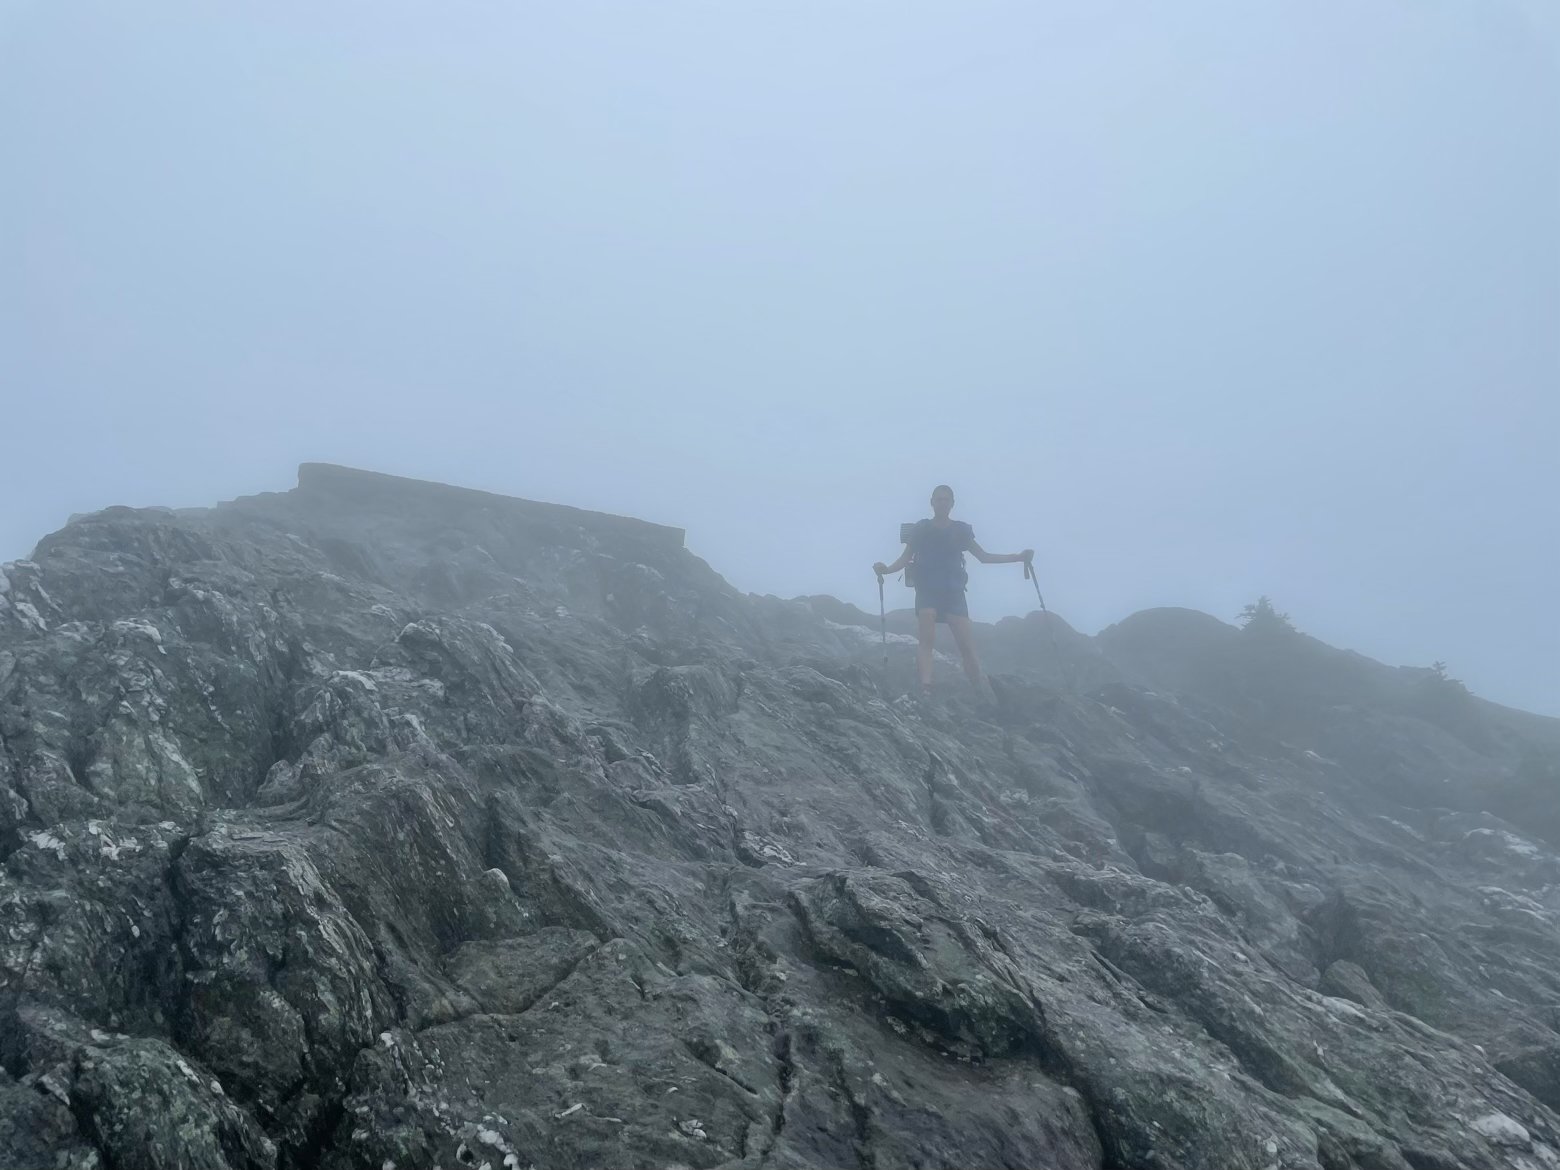 In the clouds on the summit of Jay Peak